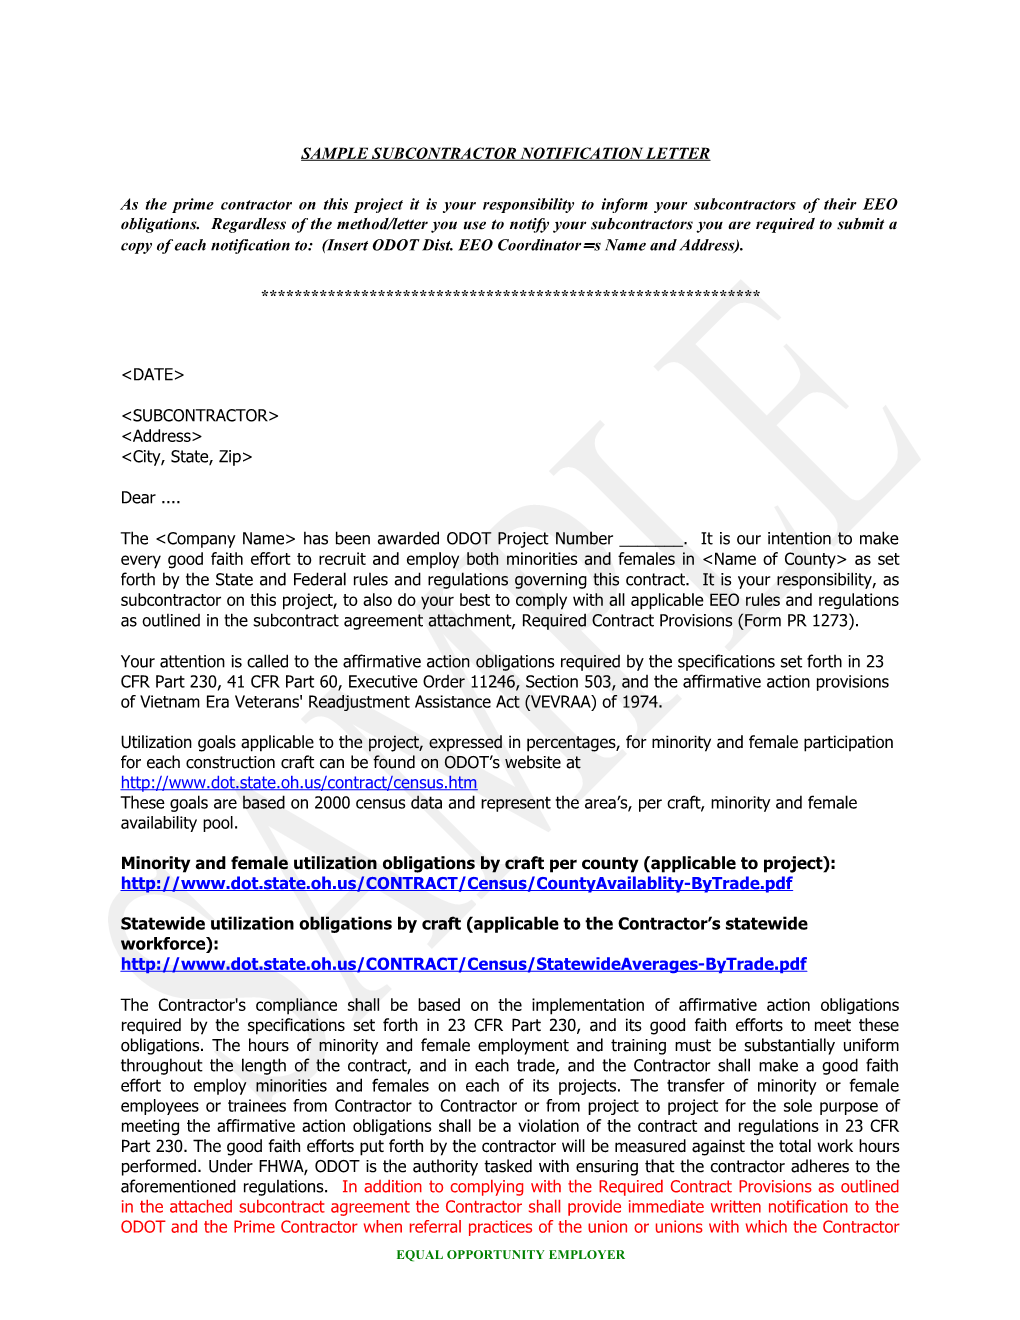 Sample Subcontractor Notification Letter